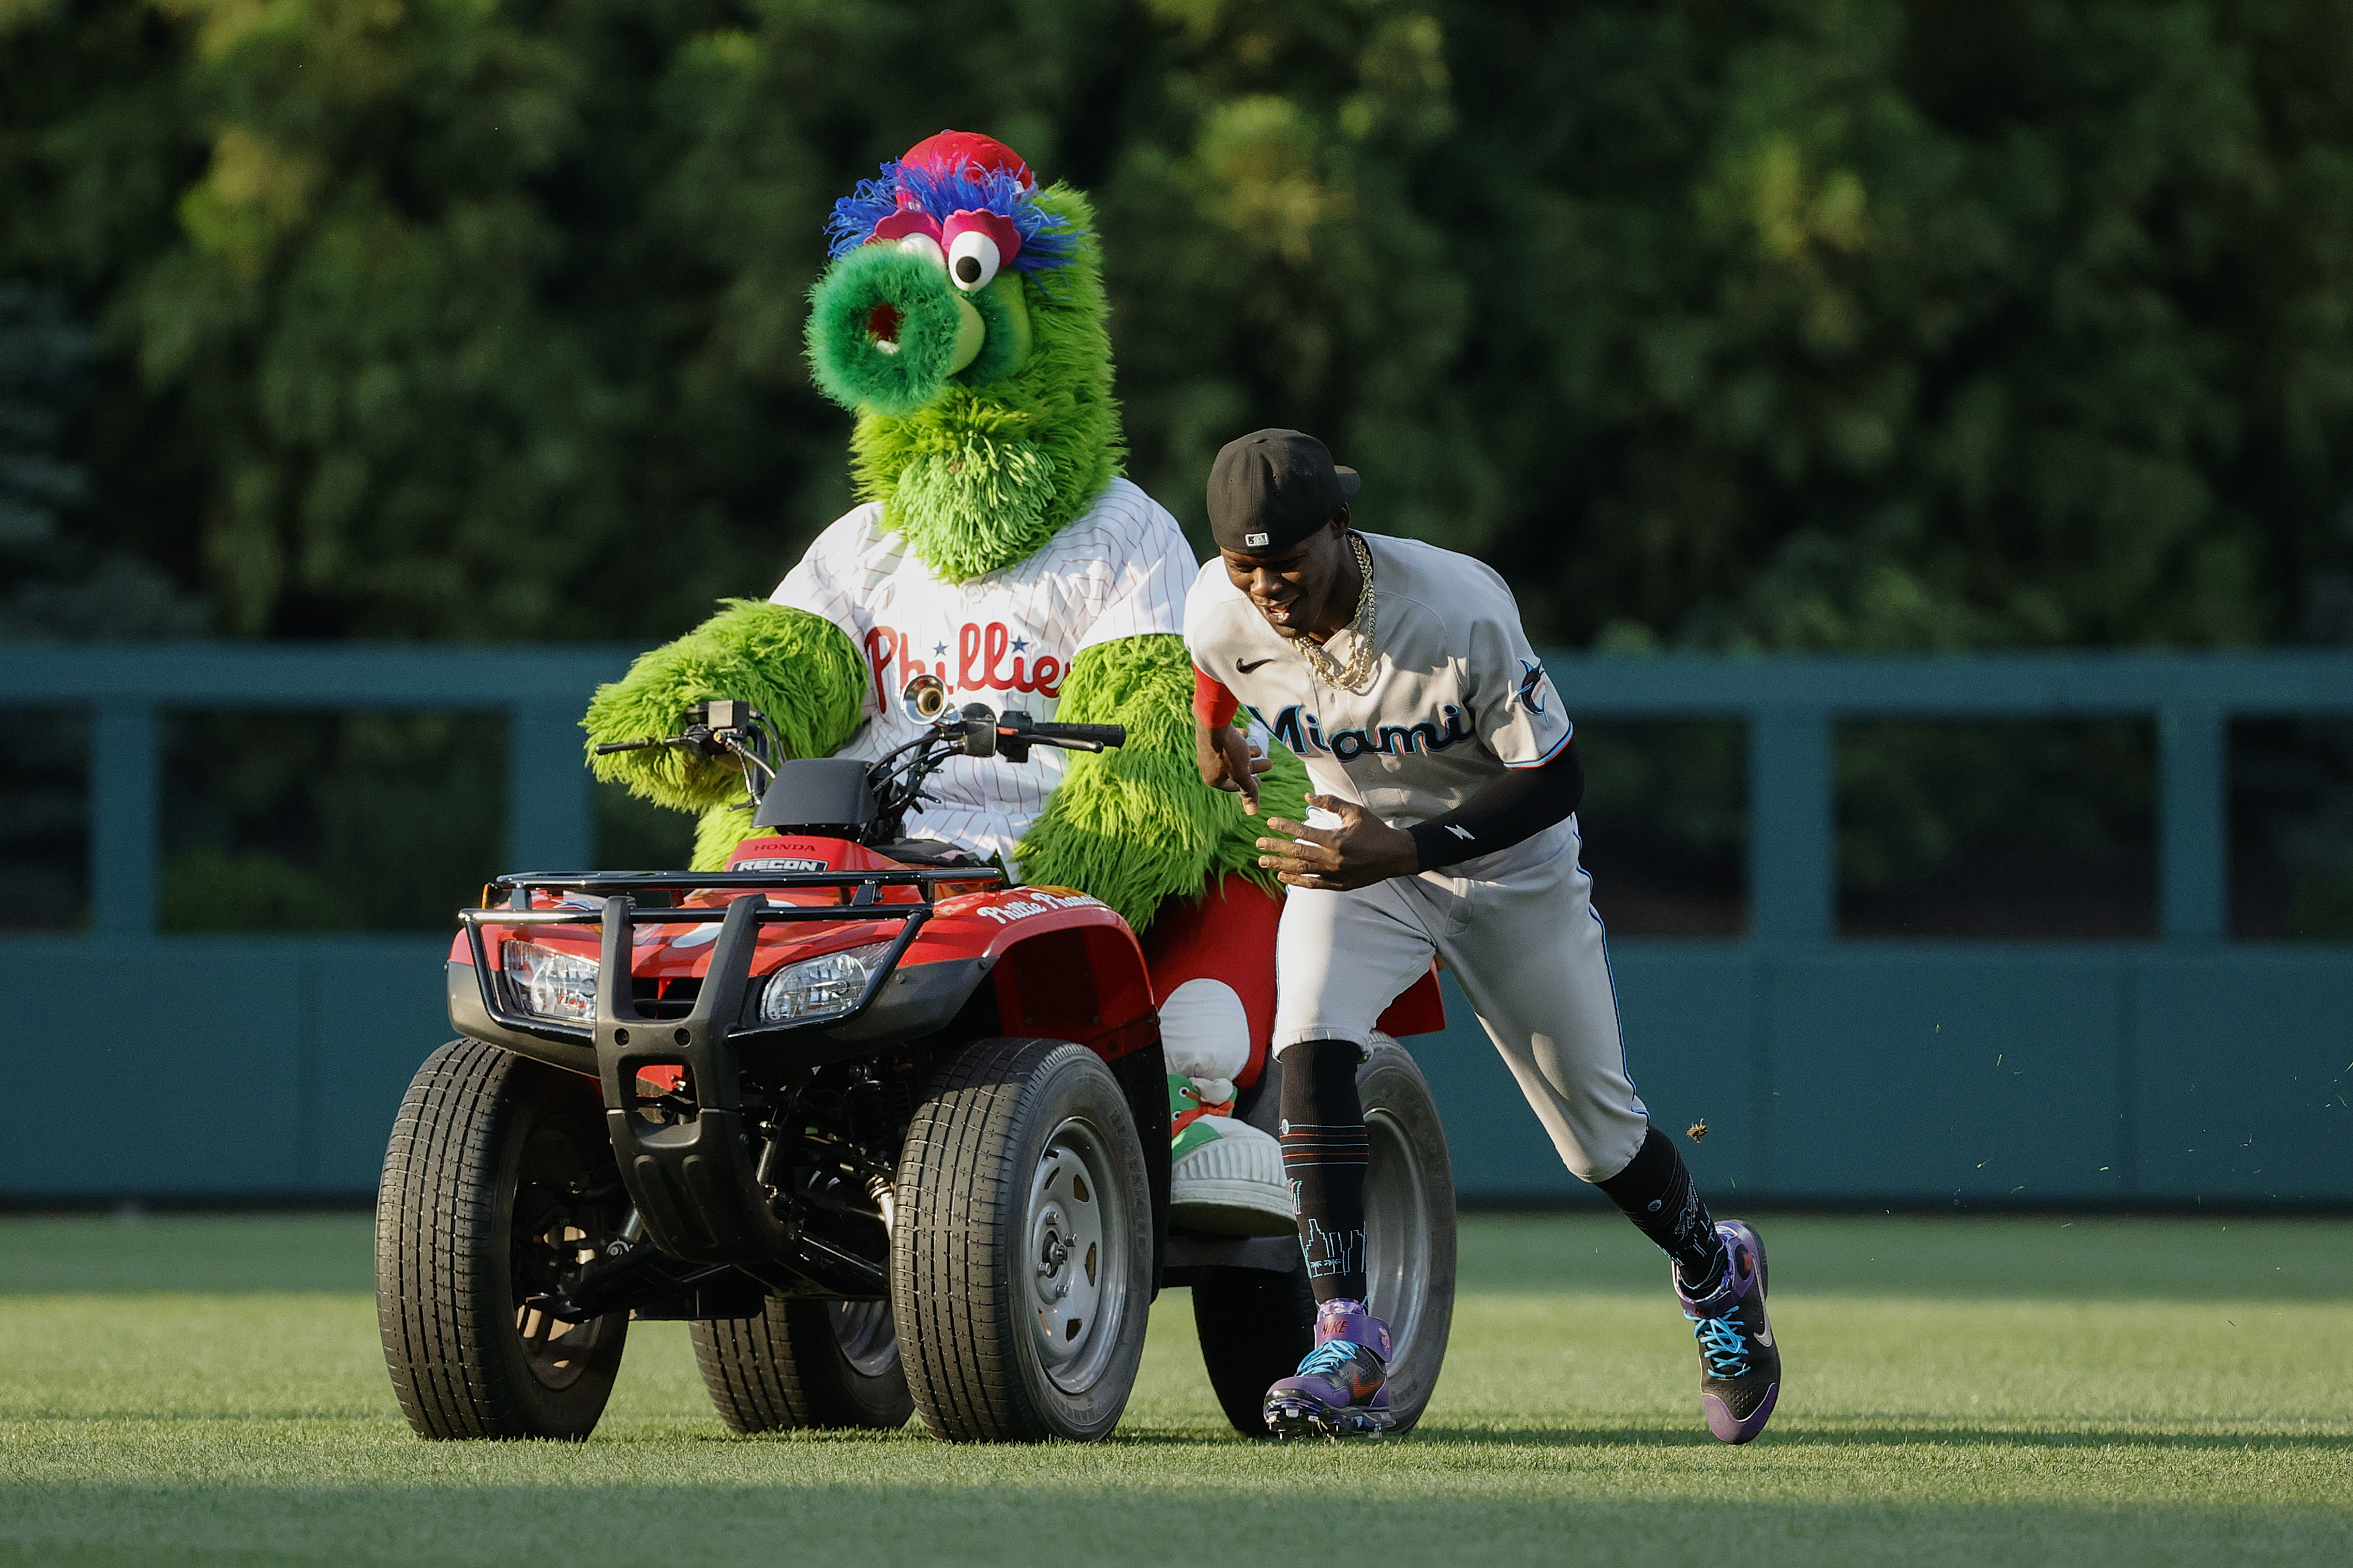 Jazz Chisholm Jr. #2 of the Miami Marlins warms up with the Phillie Phanatic before a game between the Miami Marlins and the Philadelphia Phillies at Citizens Bank Park on June 13, 2022 in Philadelphia, Pennsylvania.